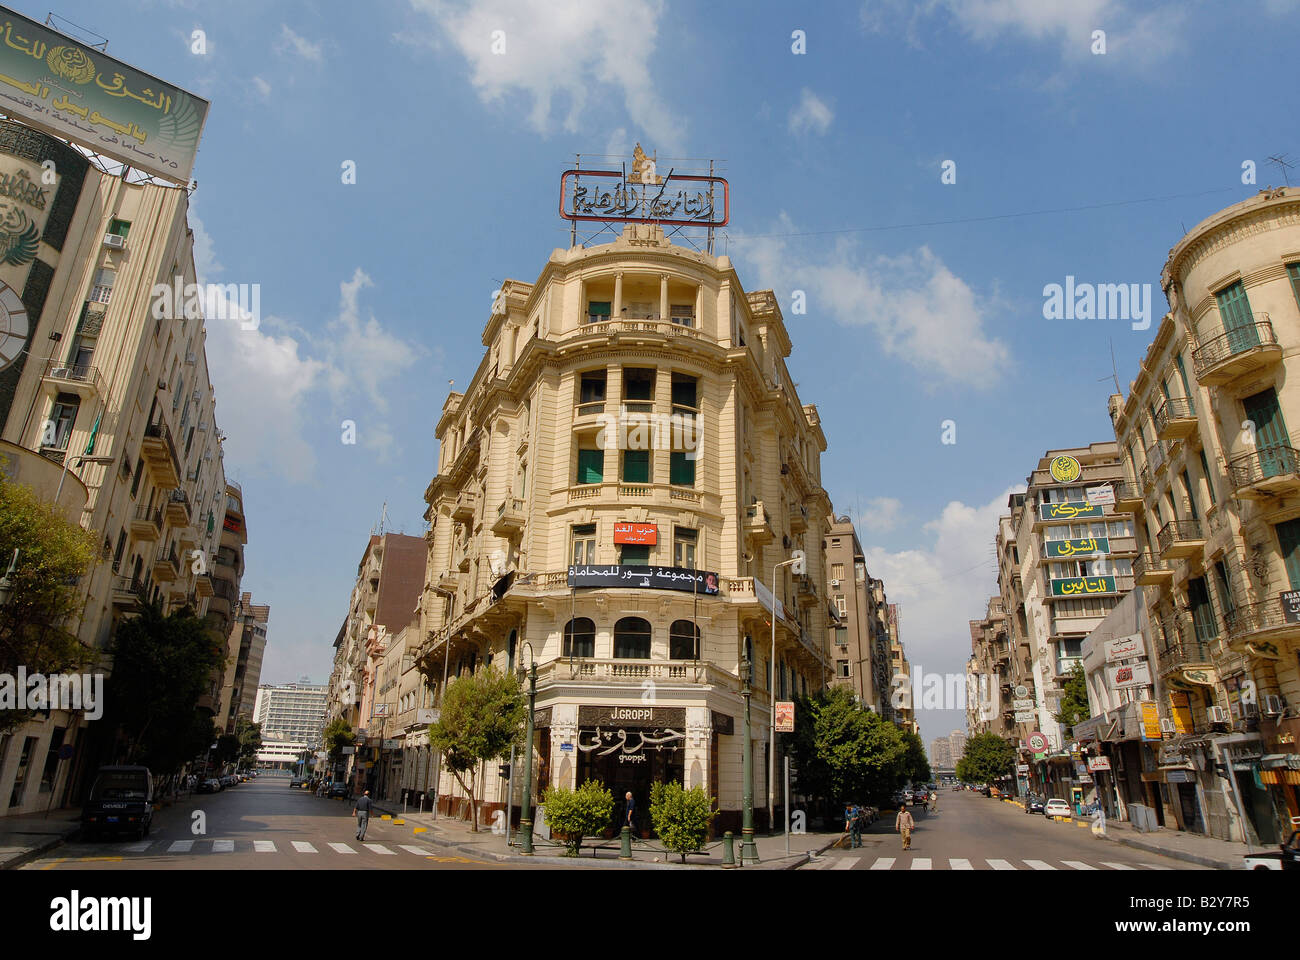 Cairo's downtown is shaped by art deco and colonial architecture. Here wellknown coffeehouse Groppi at Talaat Harb Square Stock Photo